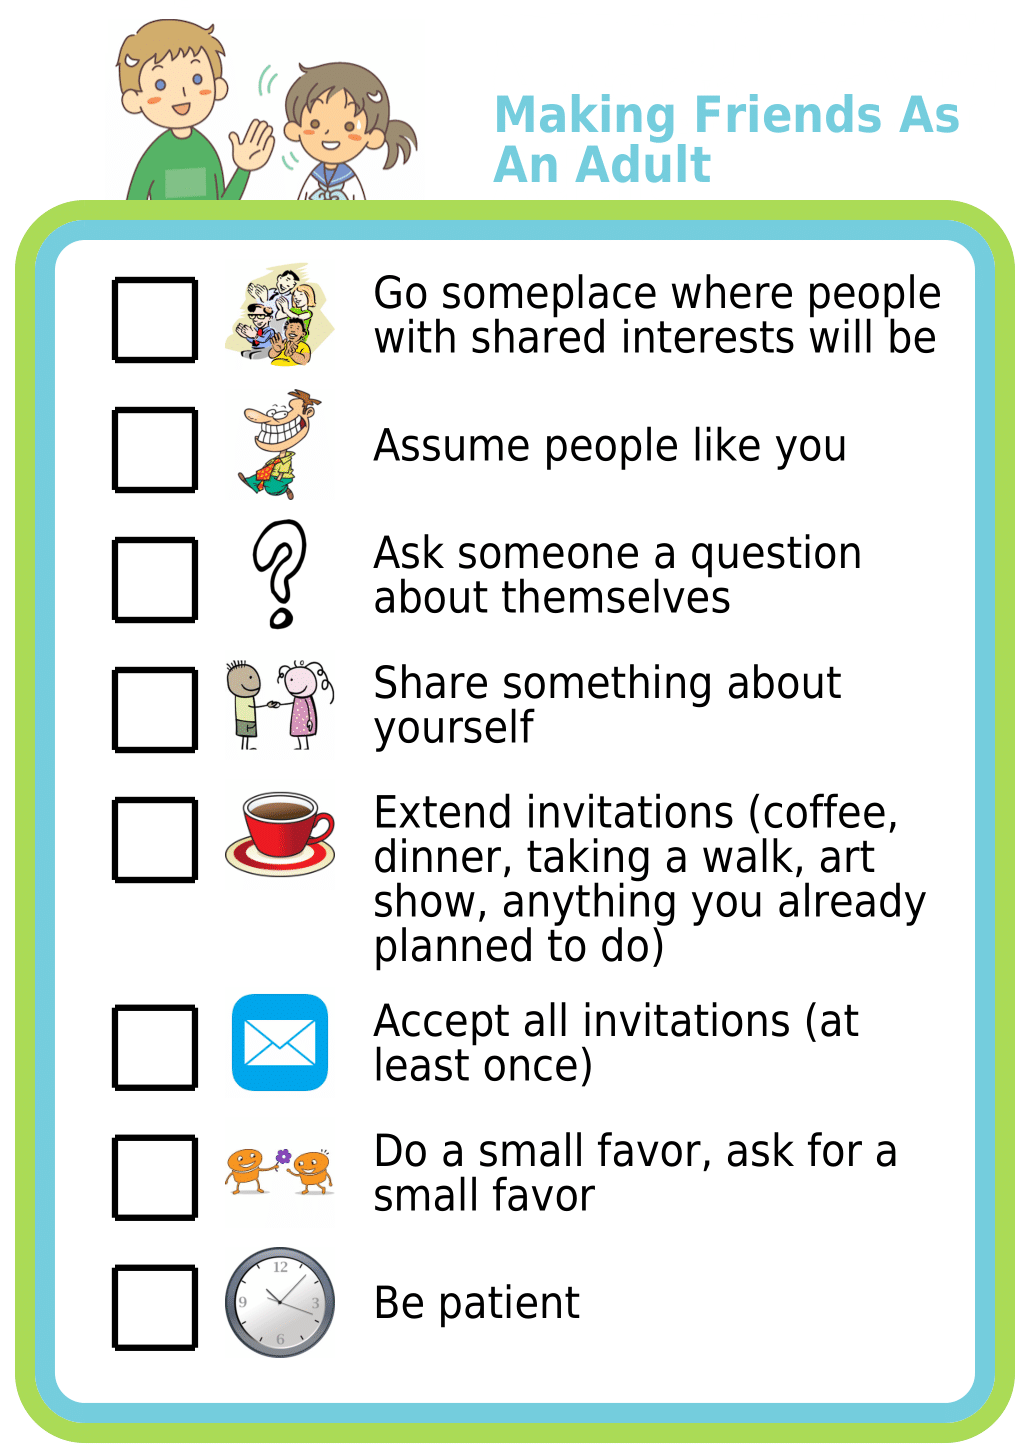 Picture checklist for how adults can work on making friends